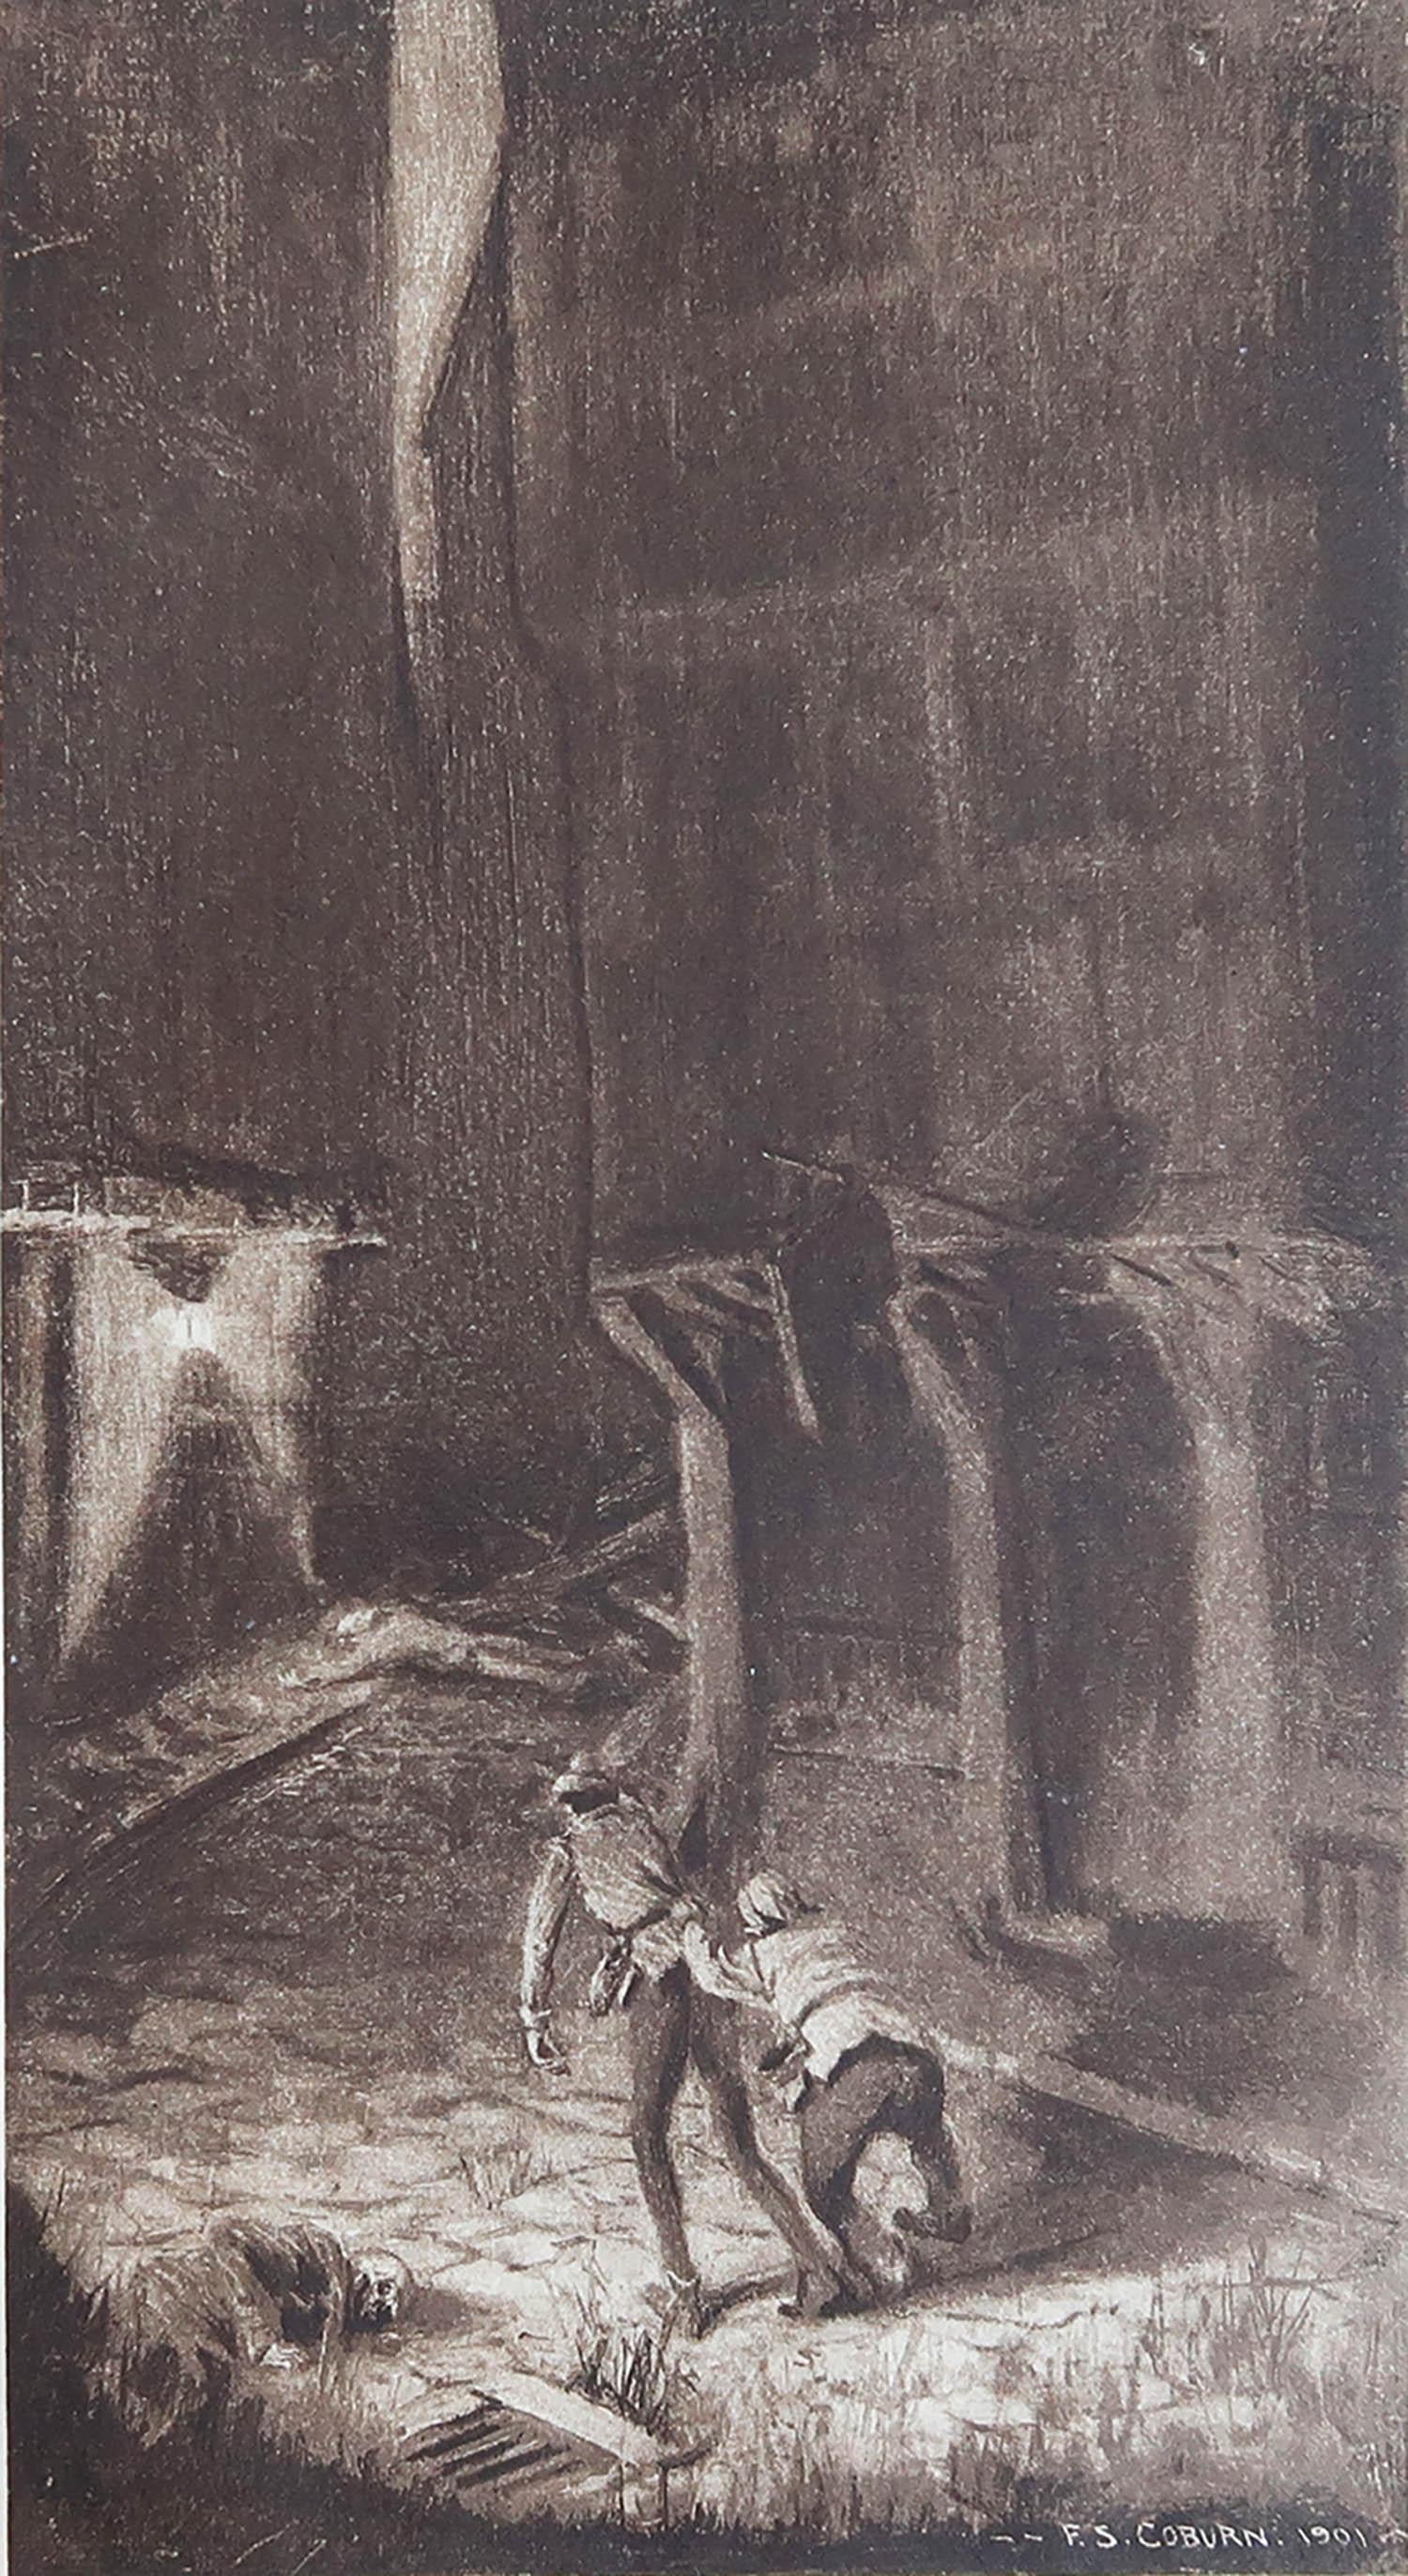 Sensational image by Frederick Simpson Coburn

In the style of one of my favourite artists, Goya

Photogravure

Limited edition of 300. This is No. 84

From The Complete Works of Edgar Allen Poe

Published by Putnam, New York. 1902

On hand made